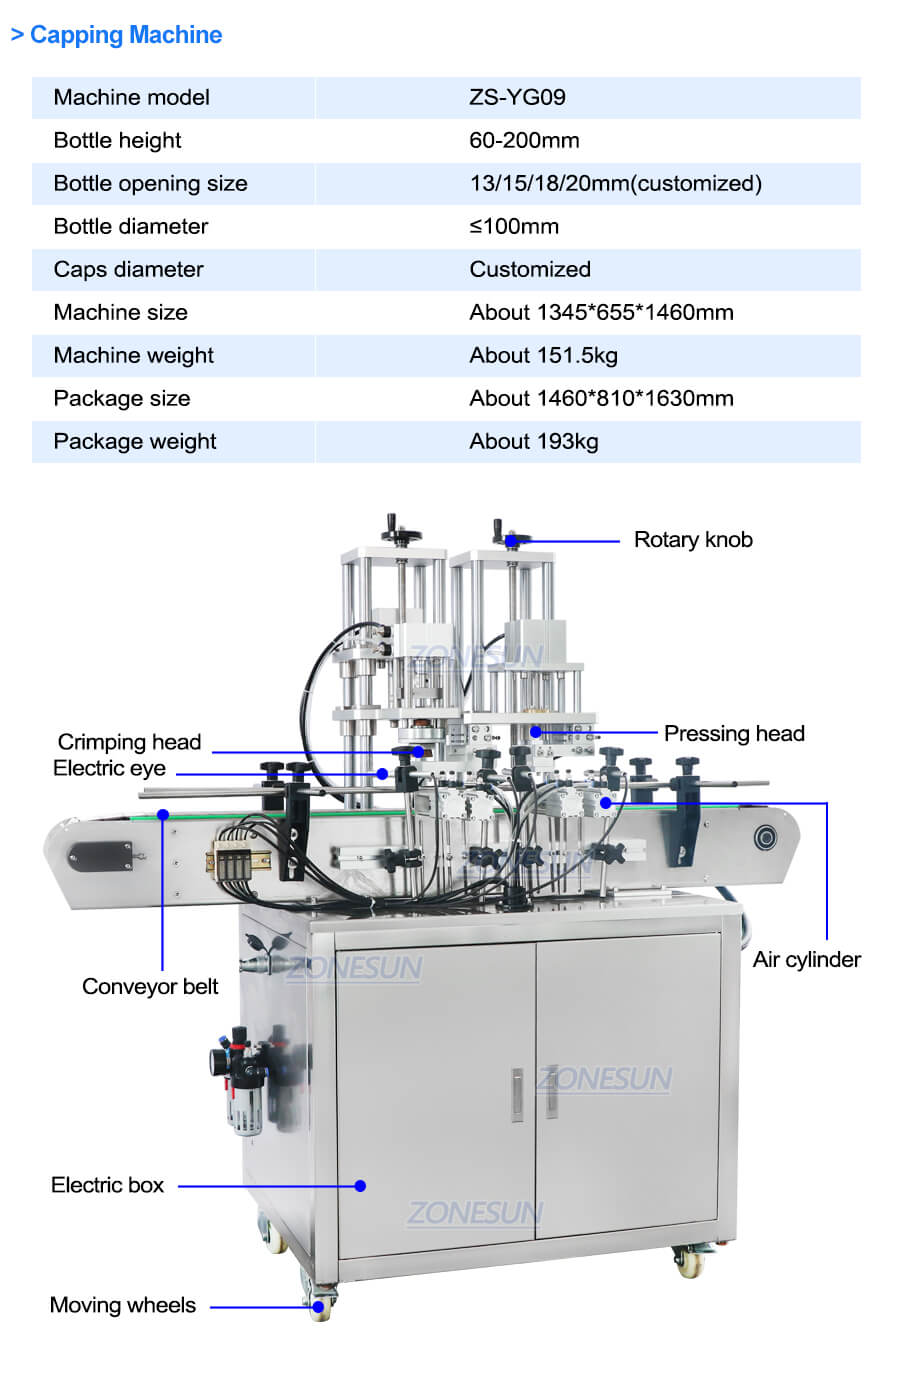 Parameter of Capping Machine